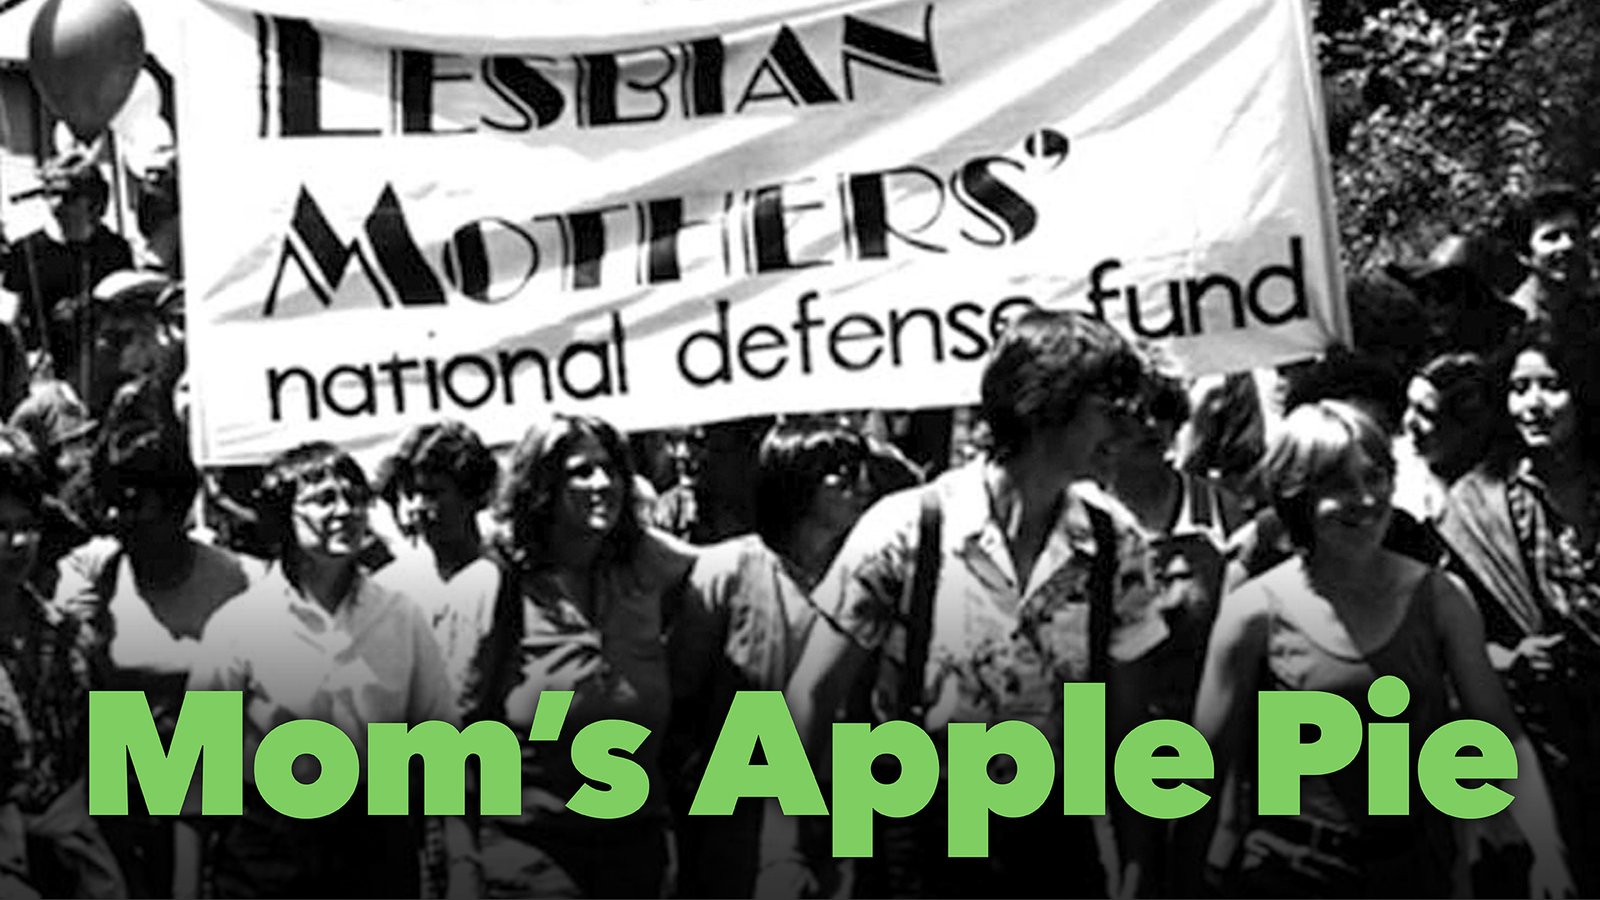 Mom's Apple Pie - The Heart of the Lesbian Mothers' Custody Movement